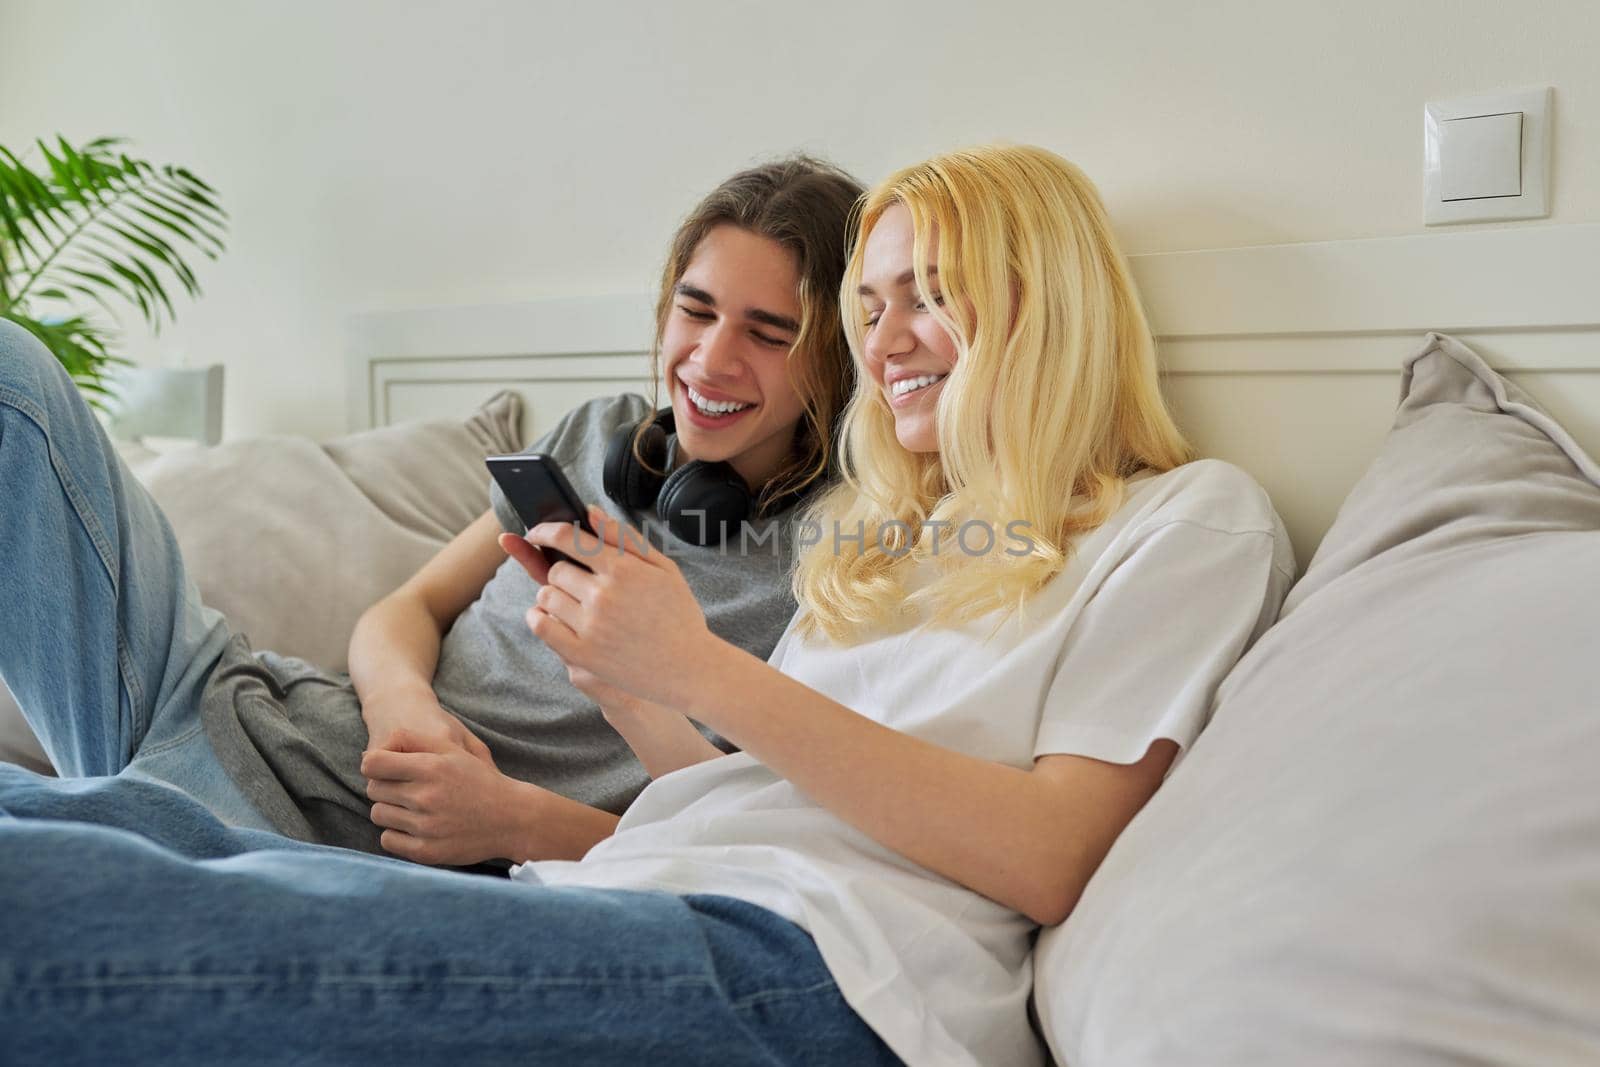 Happy laughing hipster teenagers male and female having fun using smartphone together. Couple using video call, watch funny photos videos. Lifestyle, technology, friendship, communication, adolescents